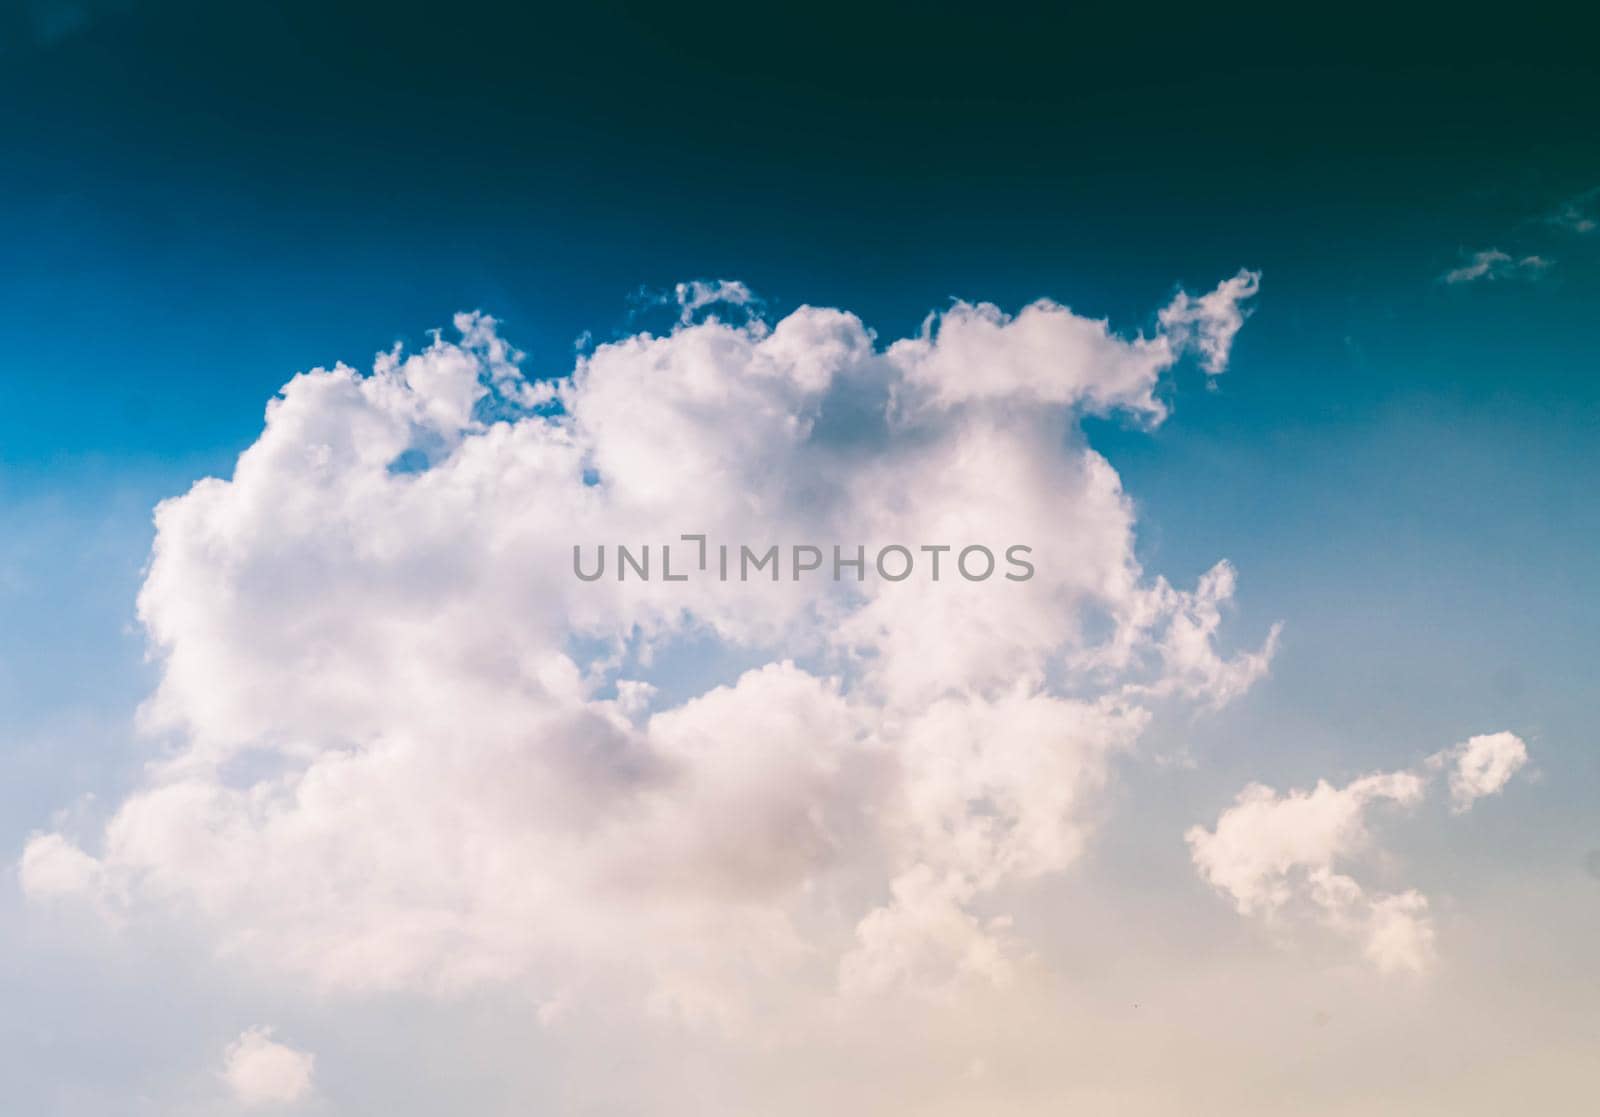 Fluffy White Clouds in A Blue Sky. Abstract background graphic design by Petrichor